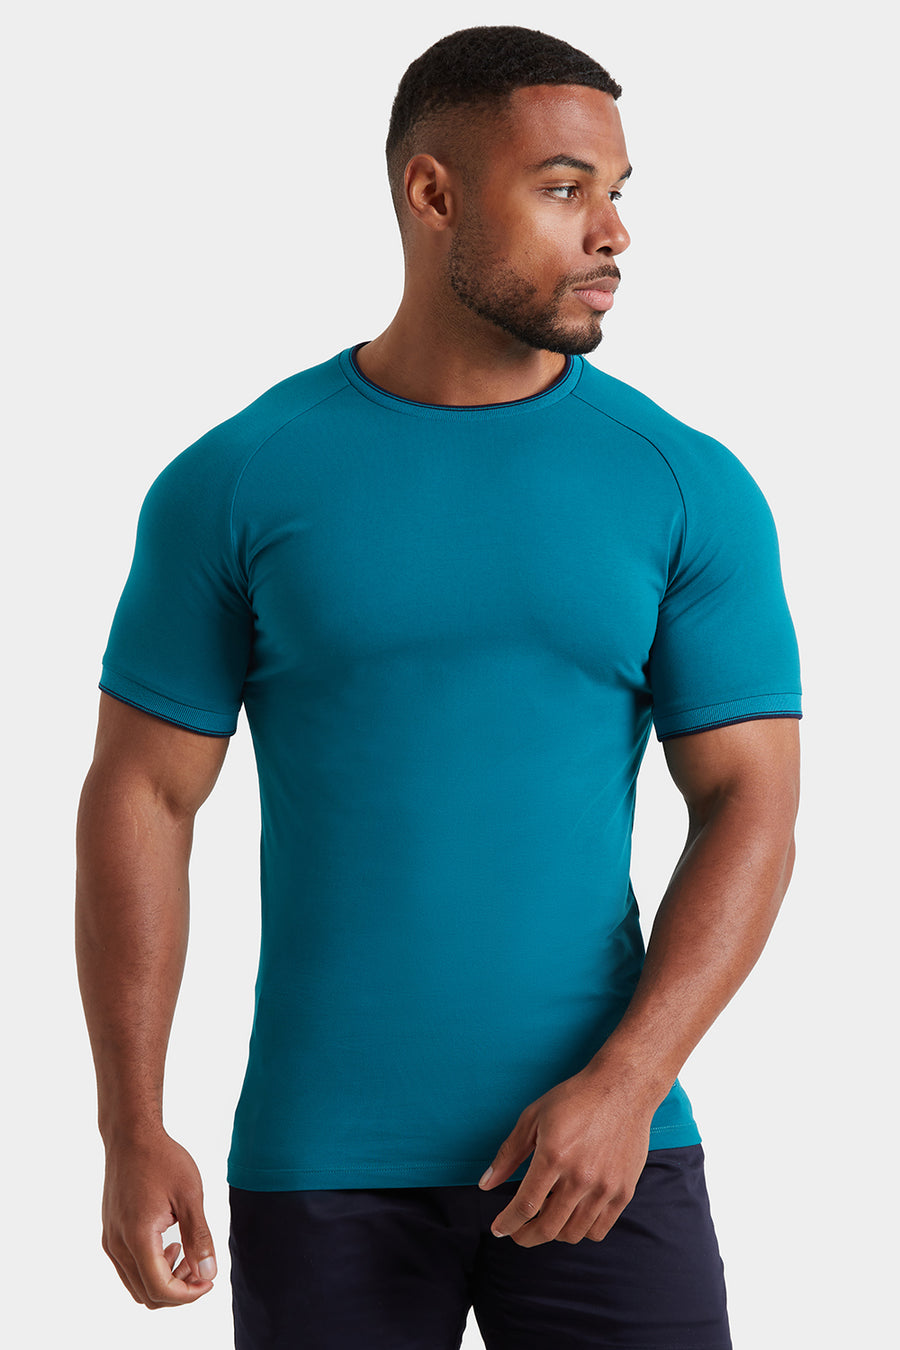 Tipped T-shirt in Peacock - TAILORED ATHLETE - USA